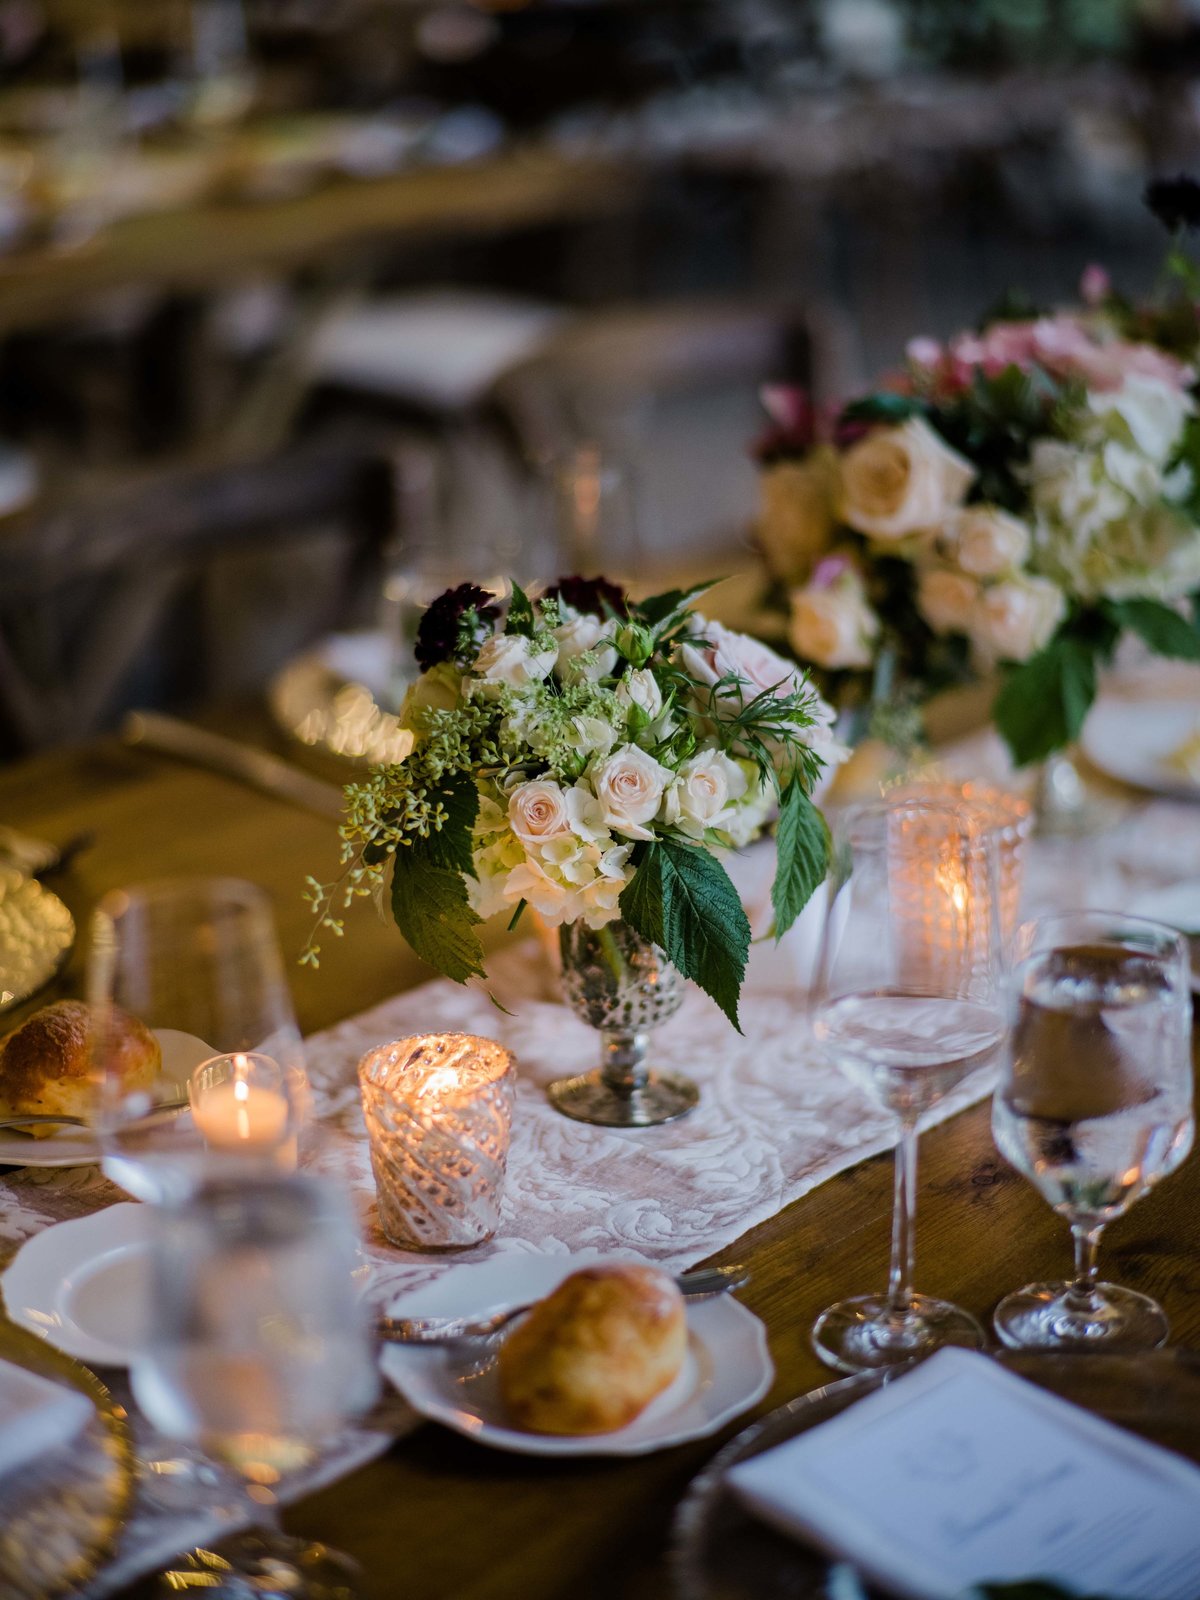 Long wooden tables with a runner and small floral compotes are perfect for a late summer garden wedding.